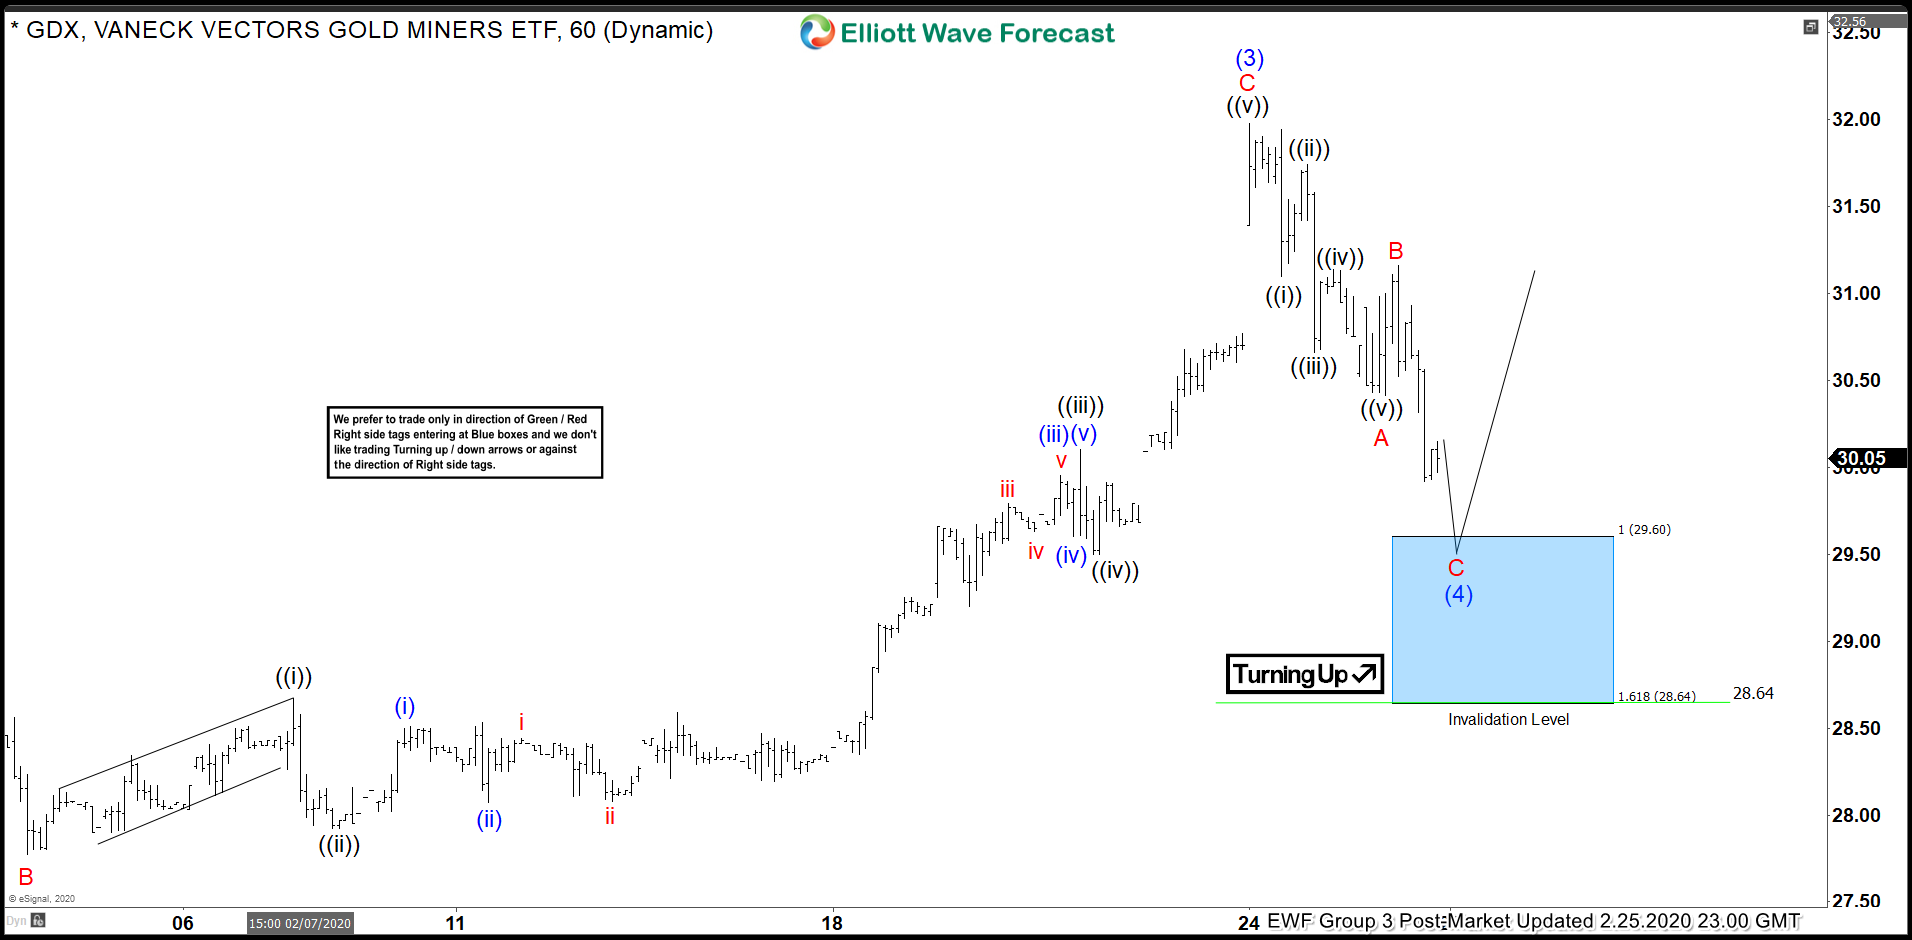 Elliott Wave View : GDX Looking to Extend Higher